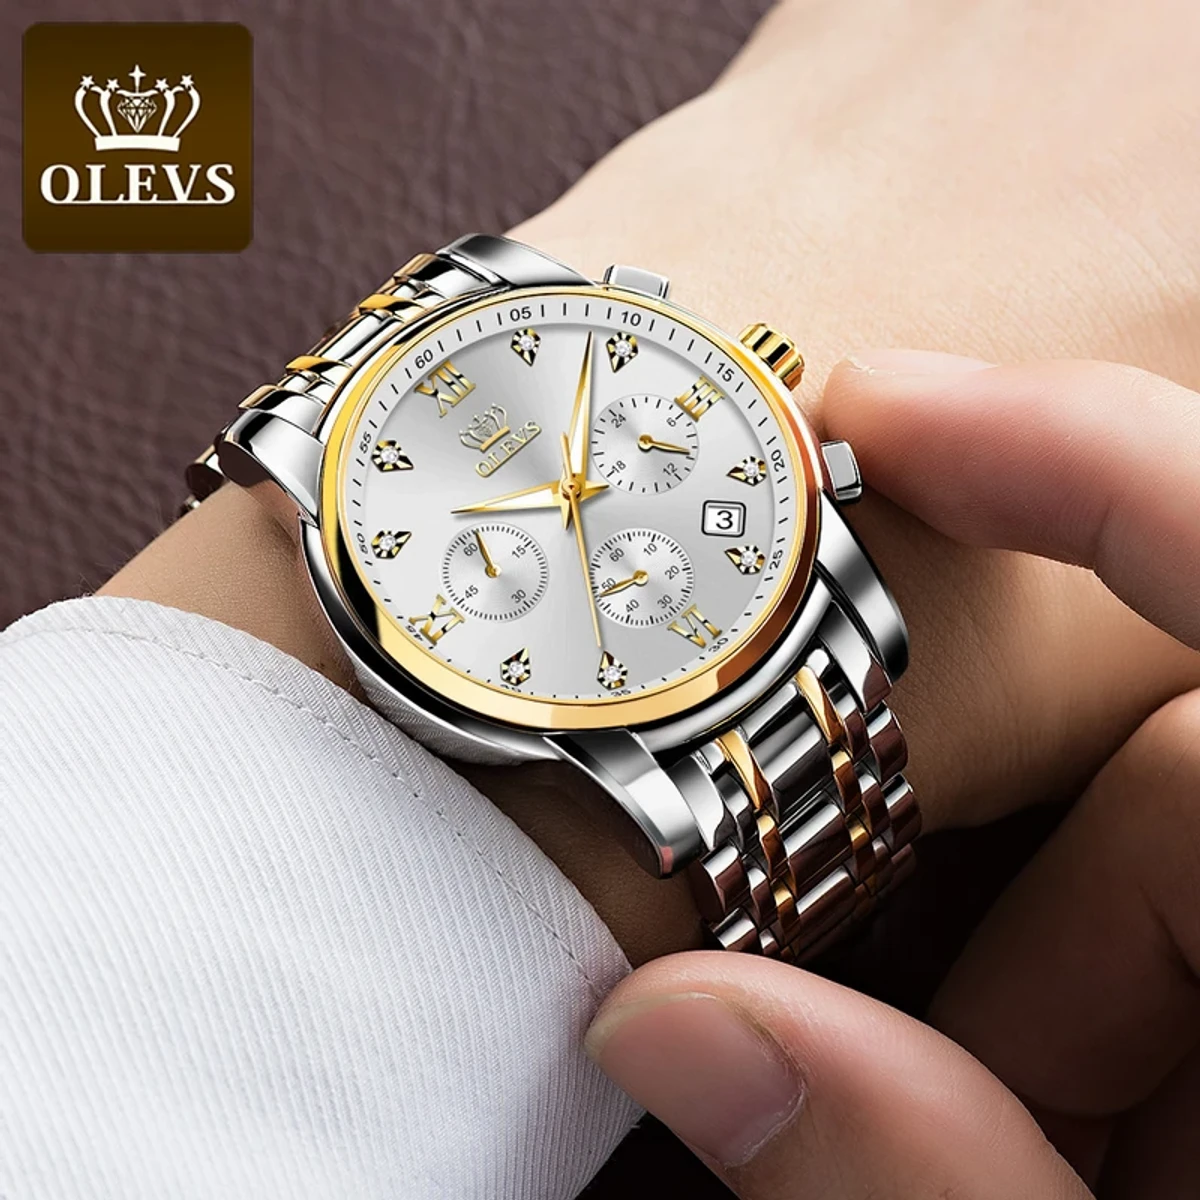 OLEVS MODEL 2858 Watch for Men Stainless Steel Watches - 2858 TOTON AR DIAL WHITE ROUND GOLDEN   COOLER WATCH - MAN WATCH